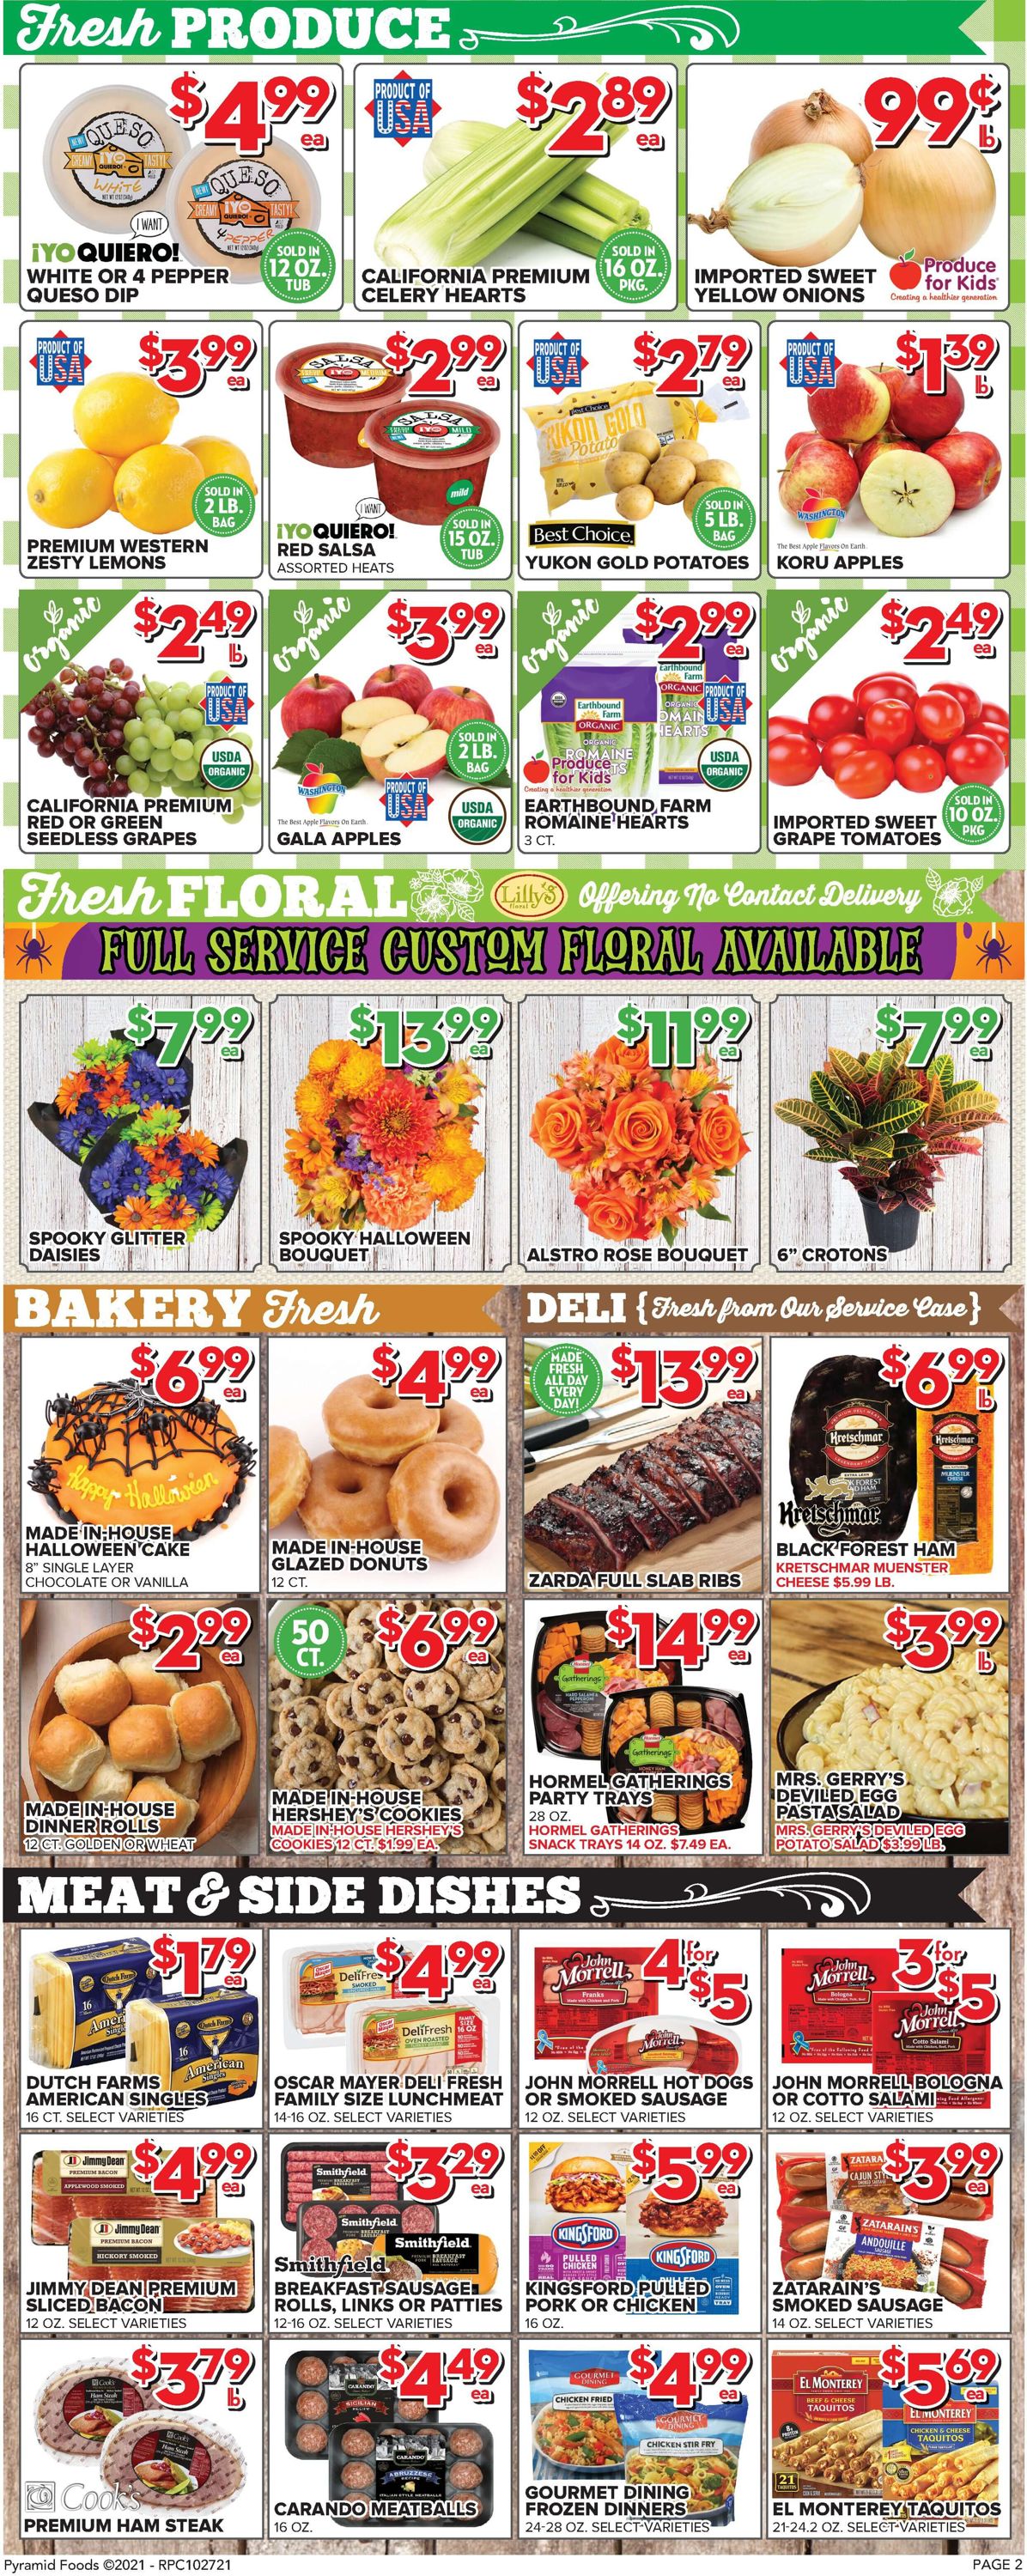 Price Cutter HALLOWEEN 2021 Weekly Ad Circular - valid 10/27-11/02/2021 (Page 2)